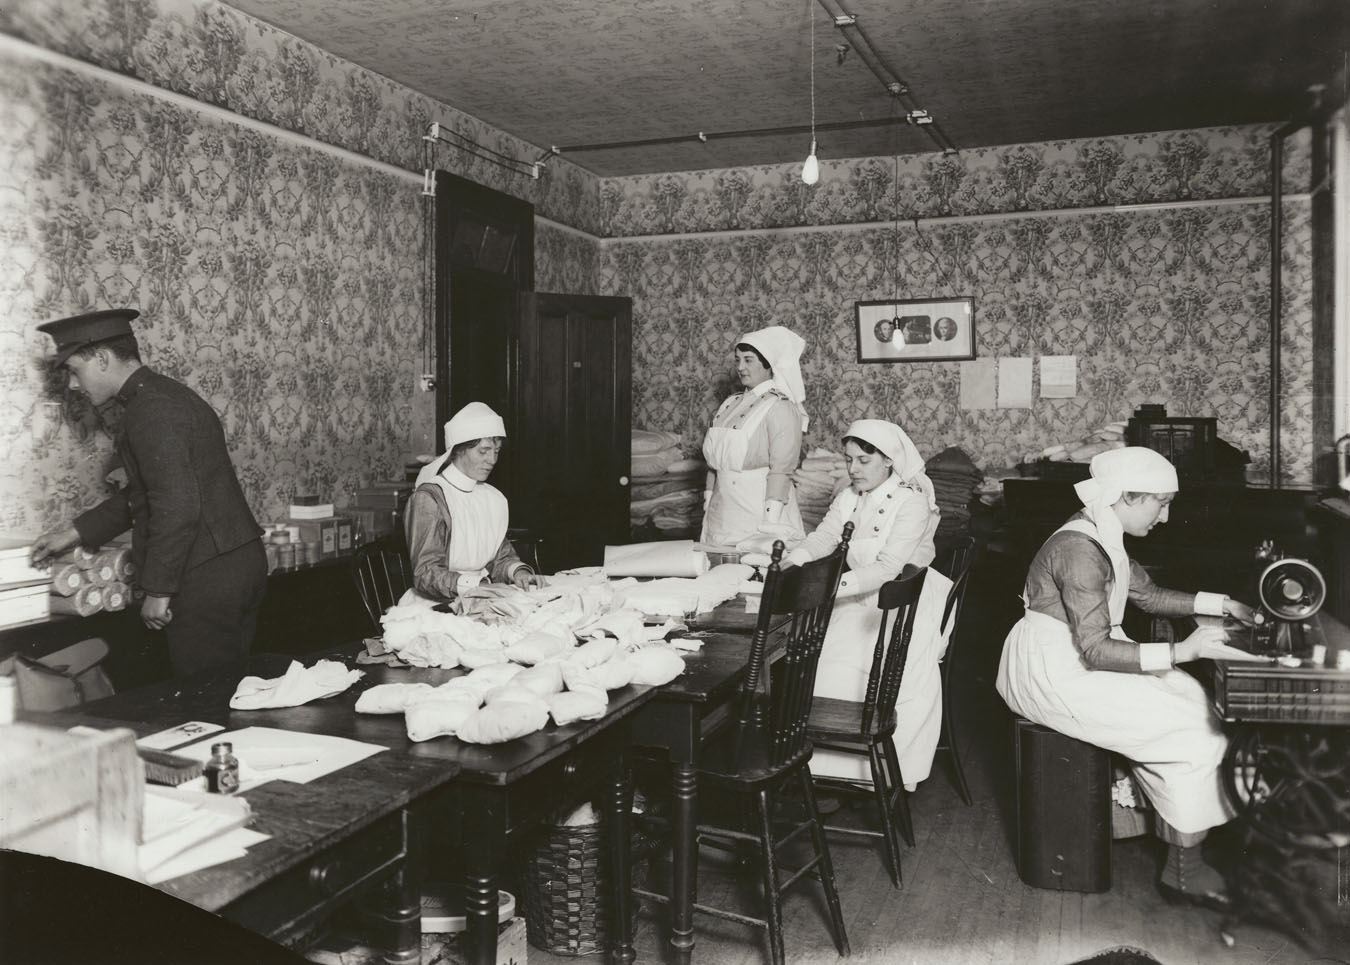 explosion : Preparing bandages for emergency relief, Halifax